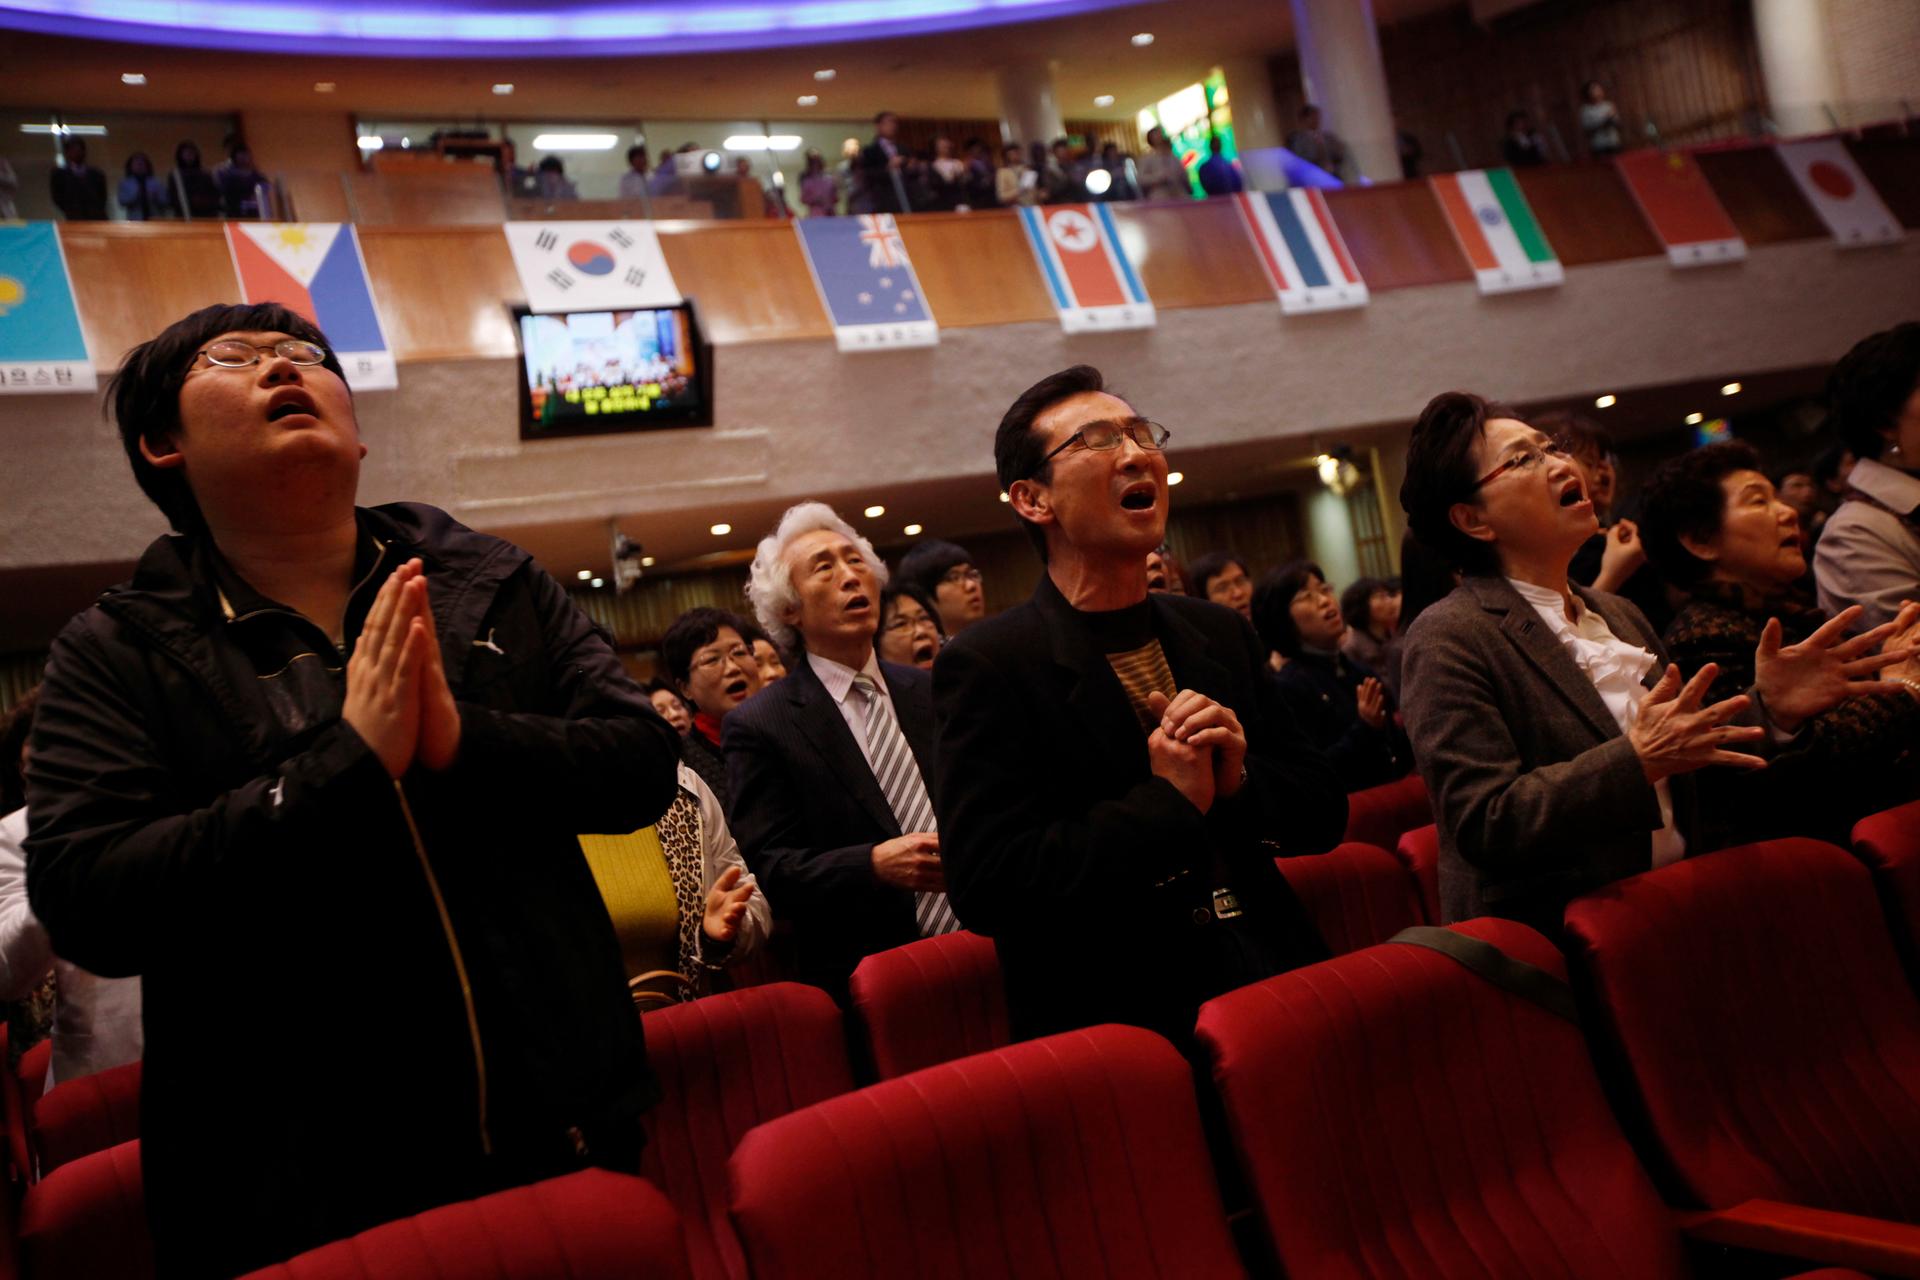 South Korean Christians pray for peace on Korean peninsula in a church where the North Korean national flag hangs among other countries' national flags in Icheon, South Korea, March 31, 2013. Holy Week is celebrated in many Christian traditions during the